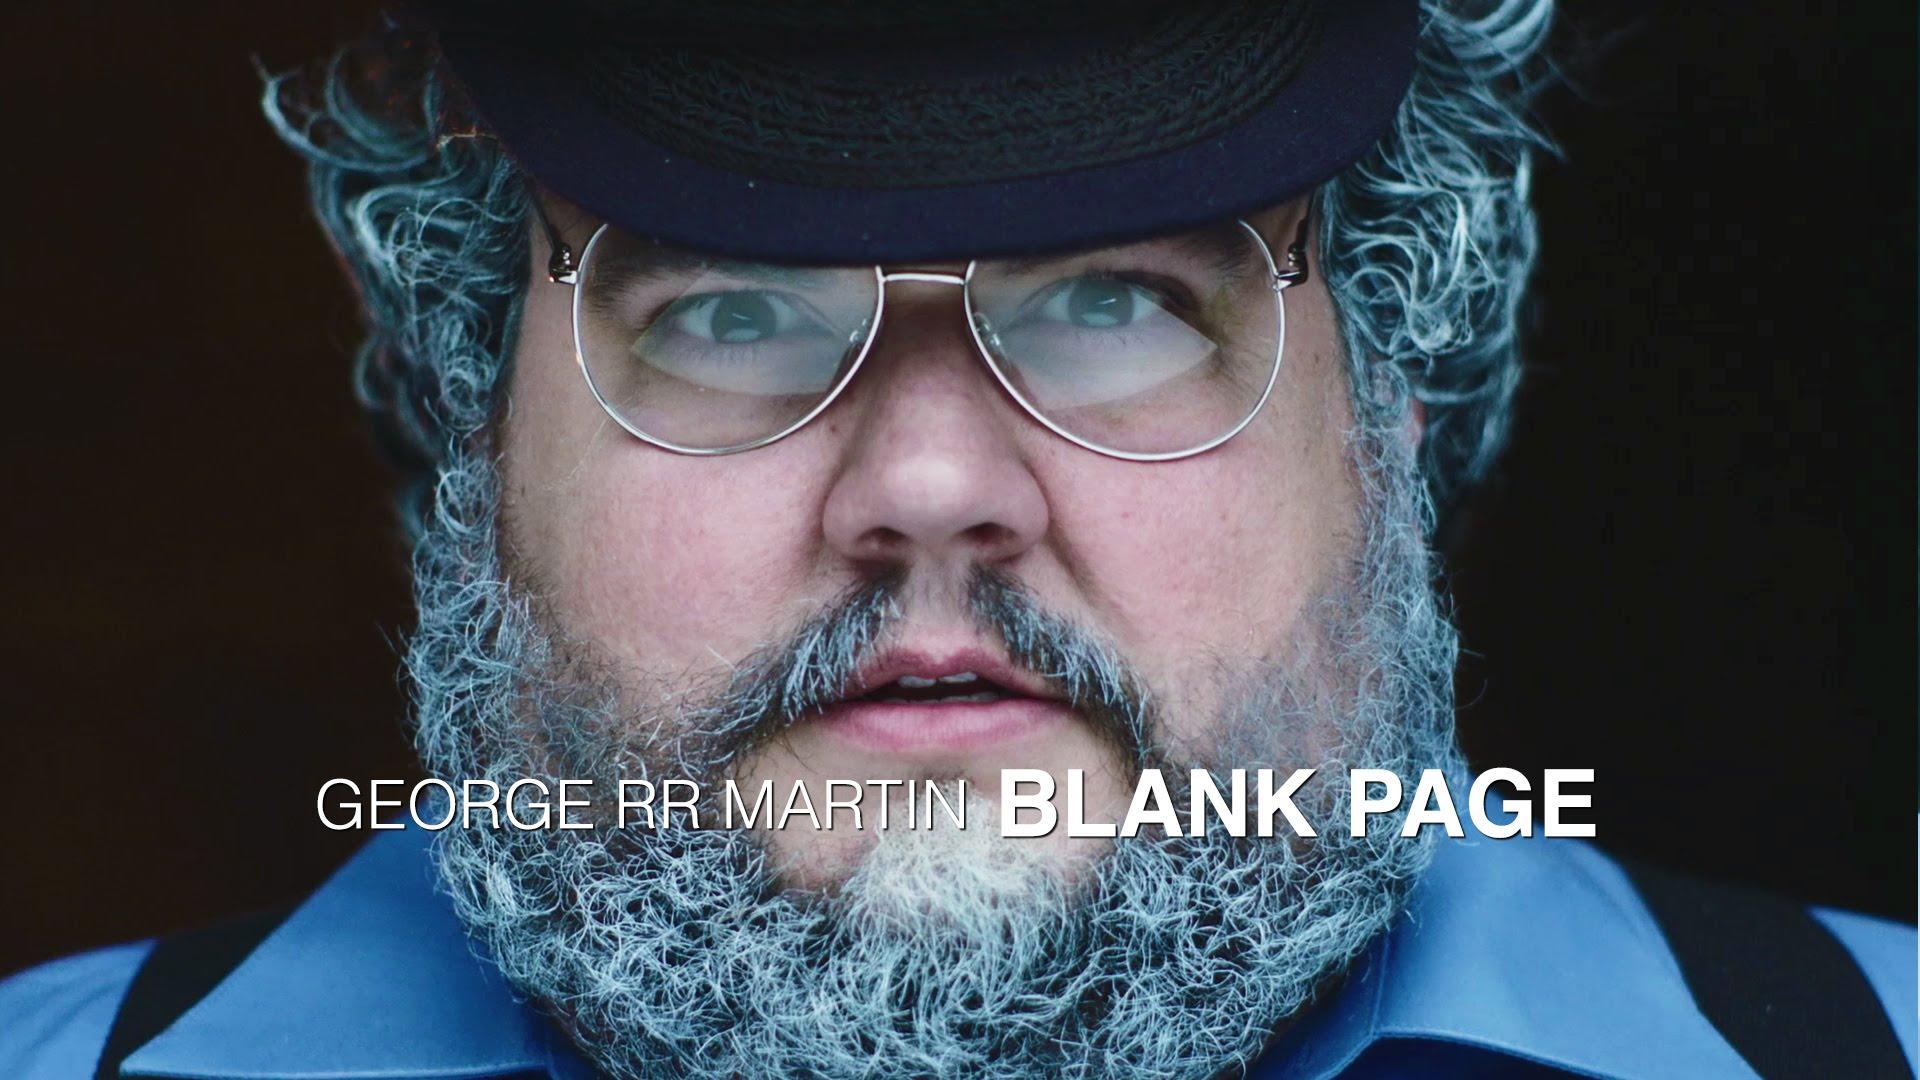 Blank Page', A 'Game of Thrones' Parody of Taylor Swift's Song